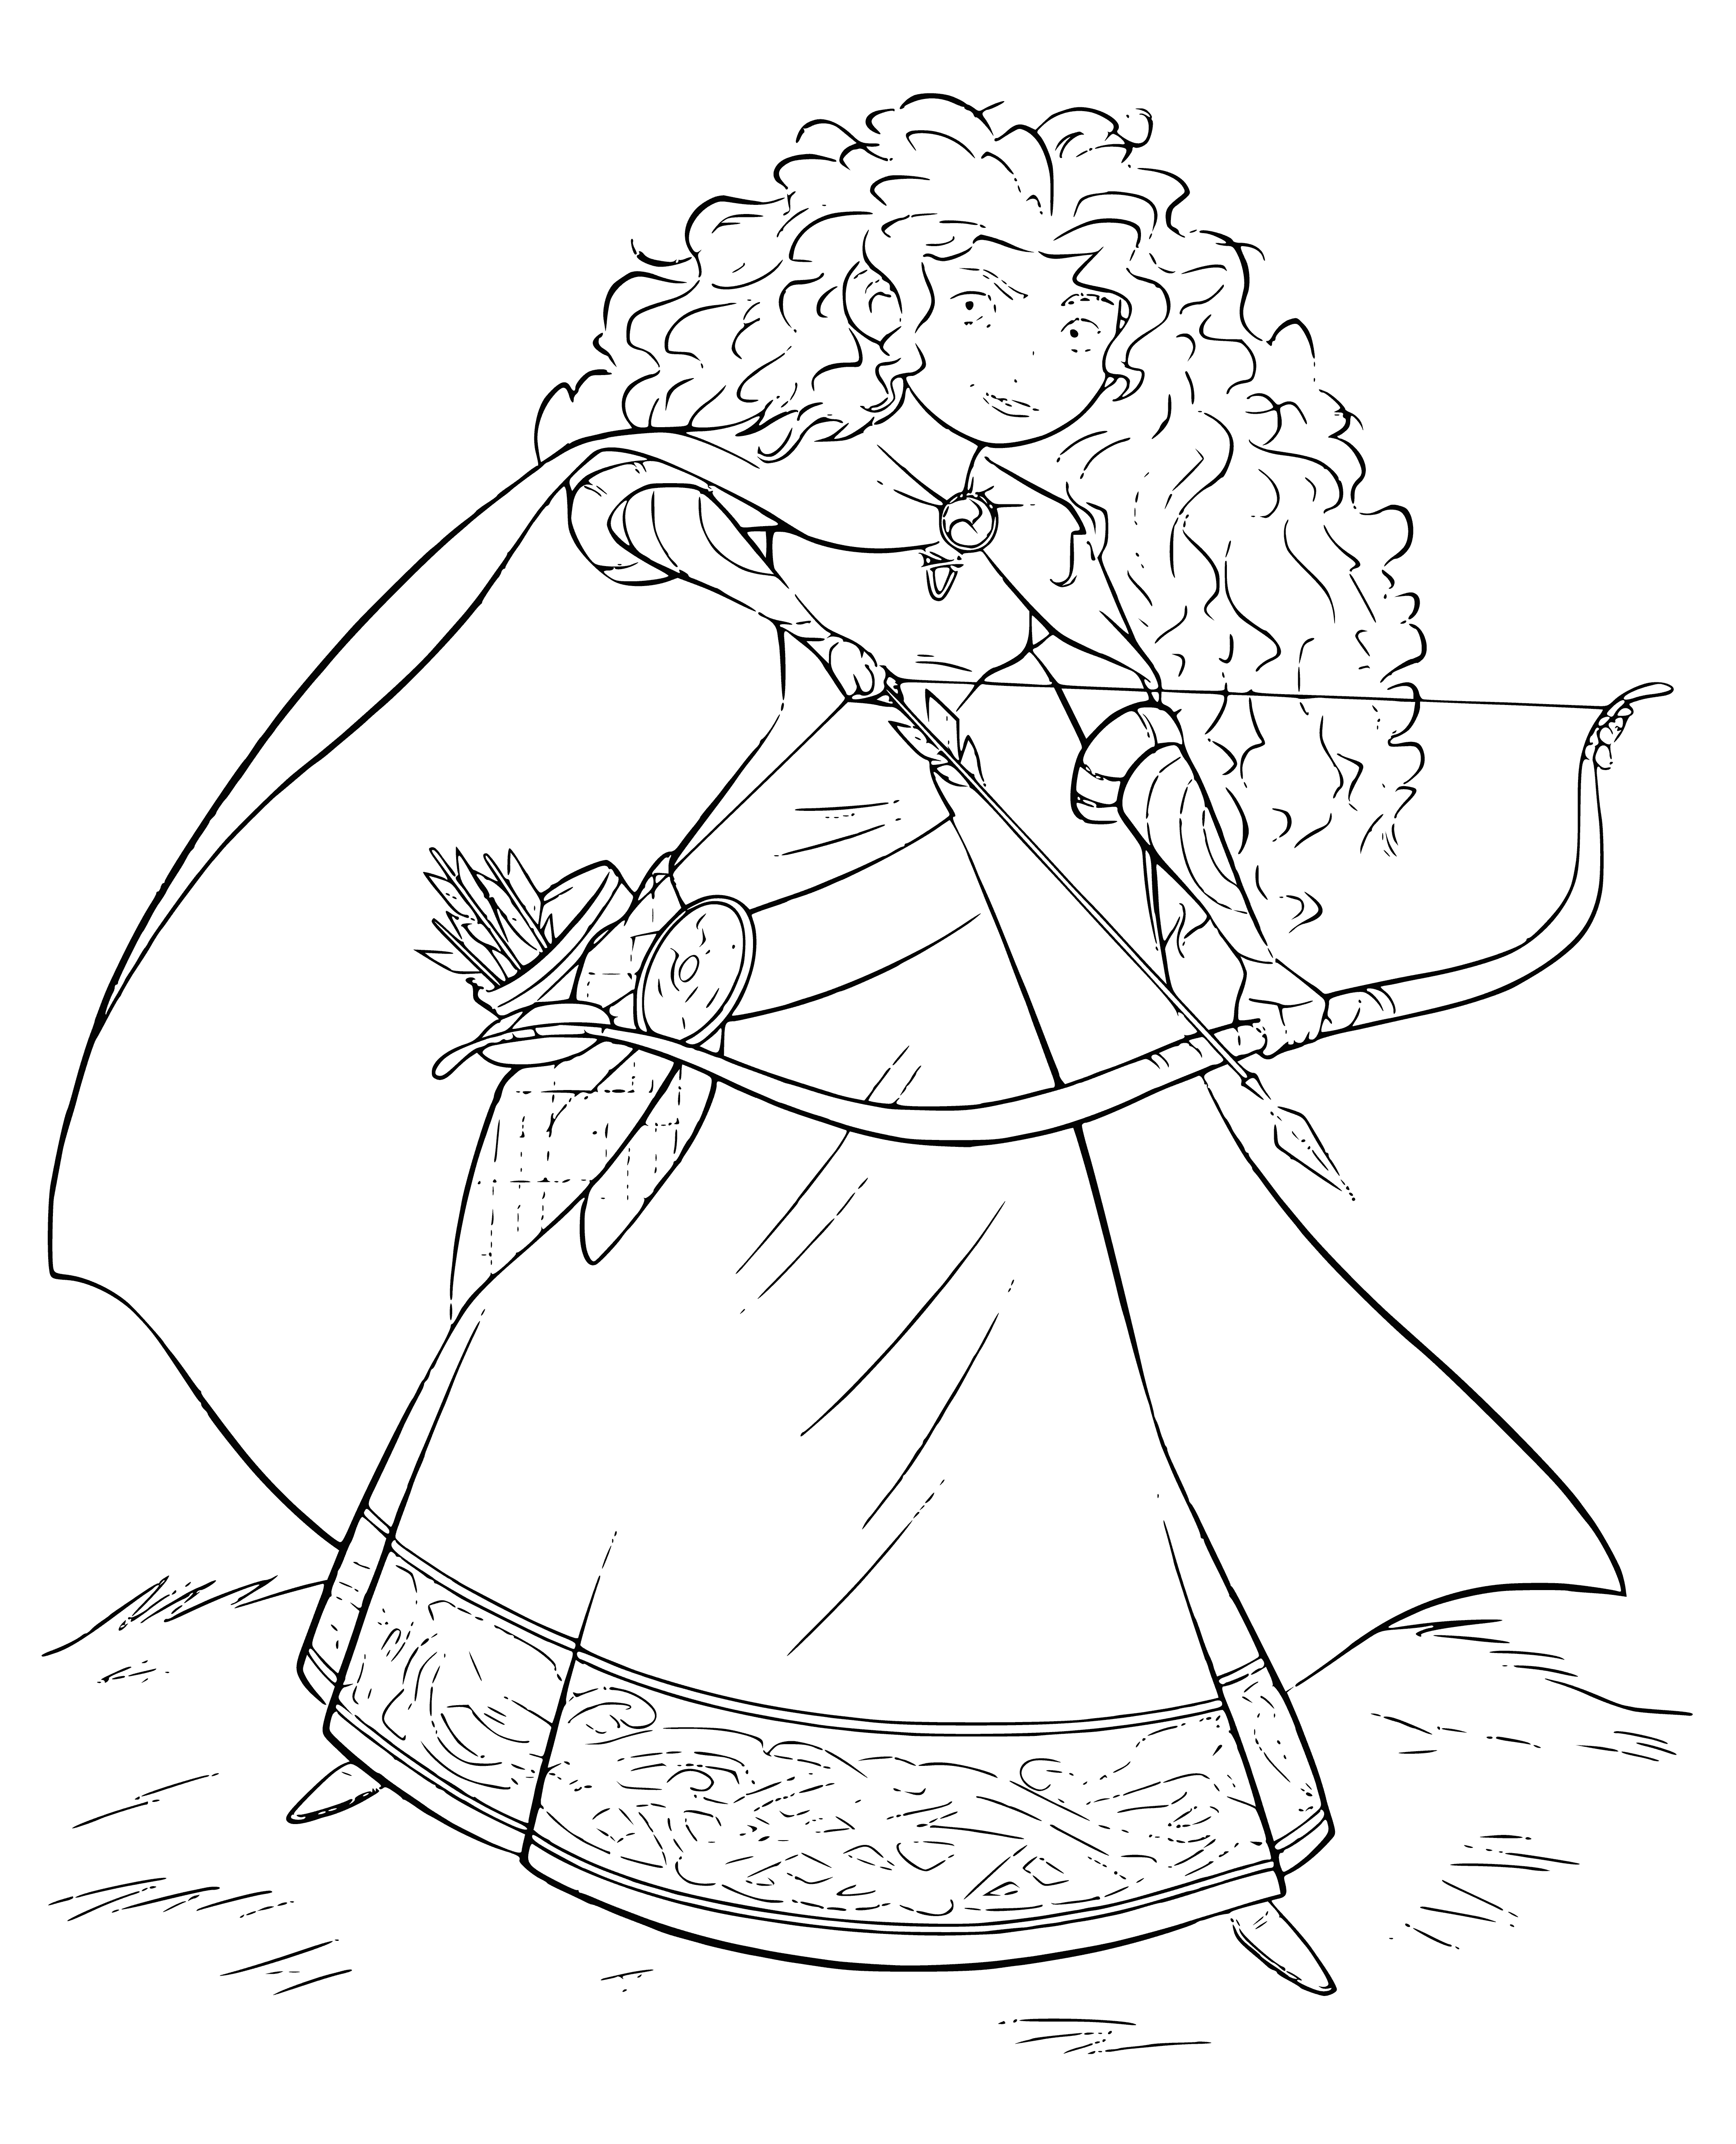 coloring page: Girl in forest w/red hair, light green dress &bow in hand. Quiver of arrows on her right shoulder, &brown boots. Ready for adventure!